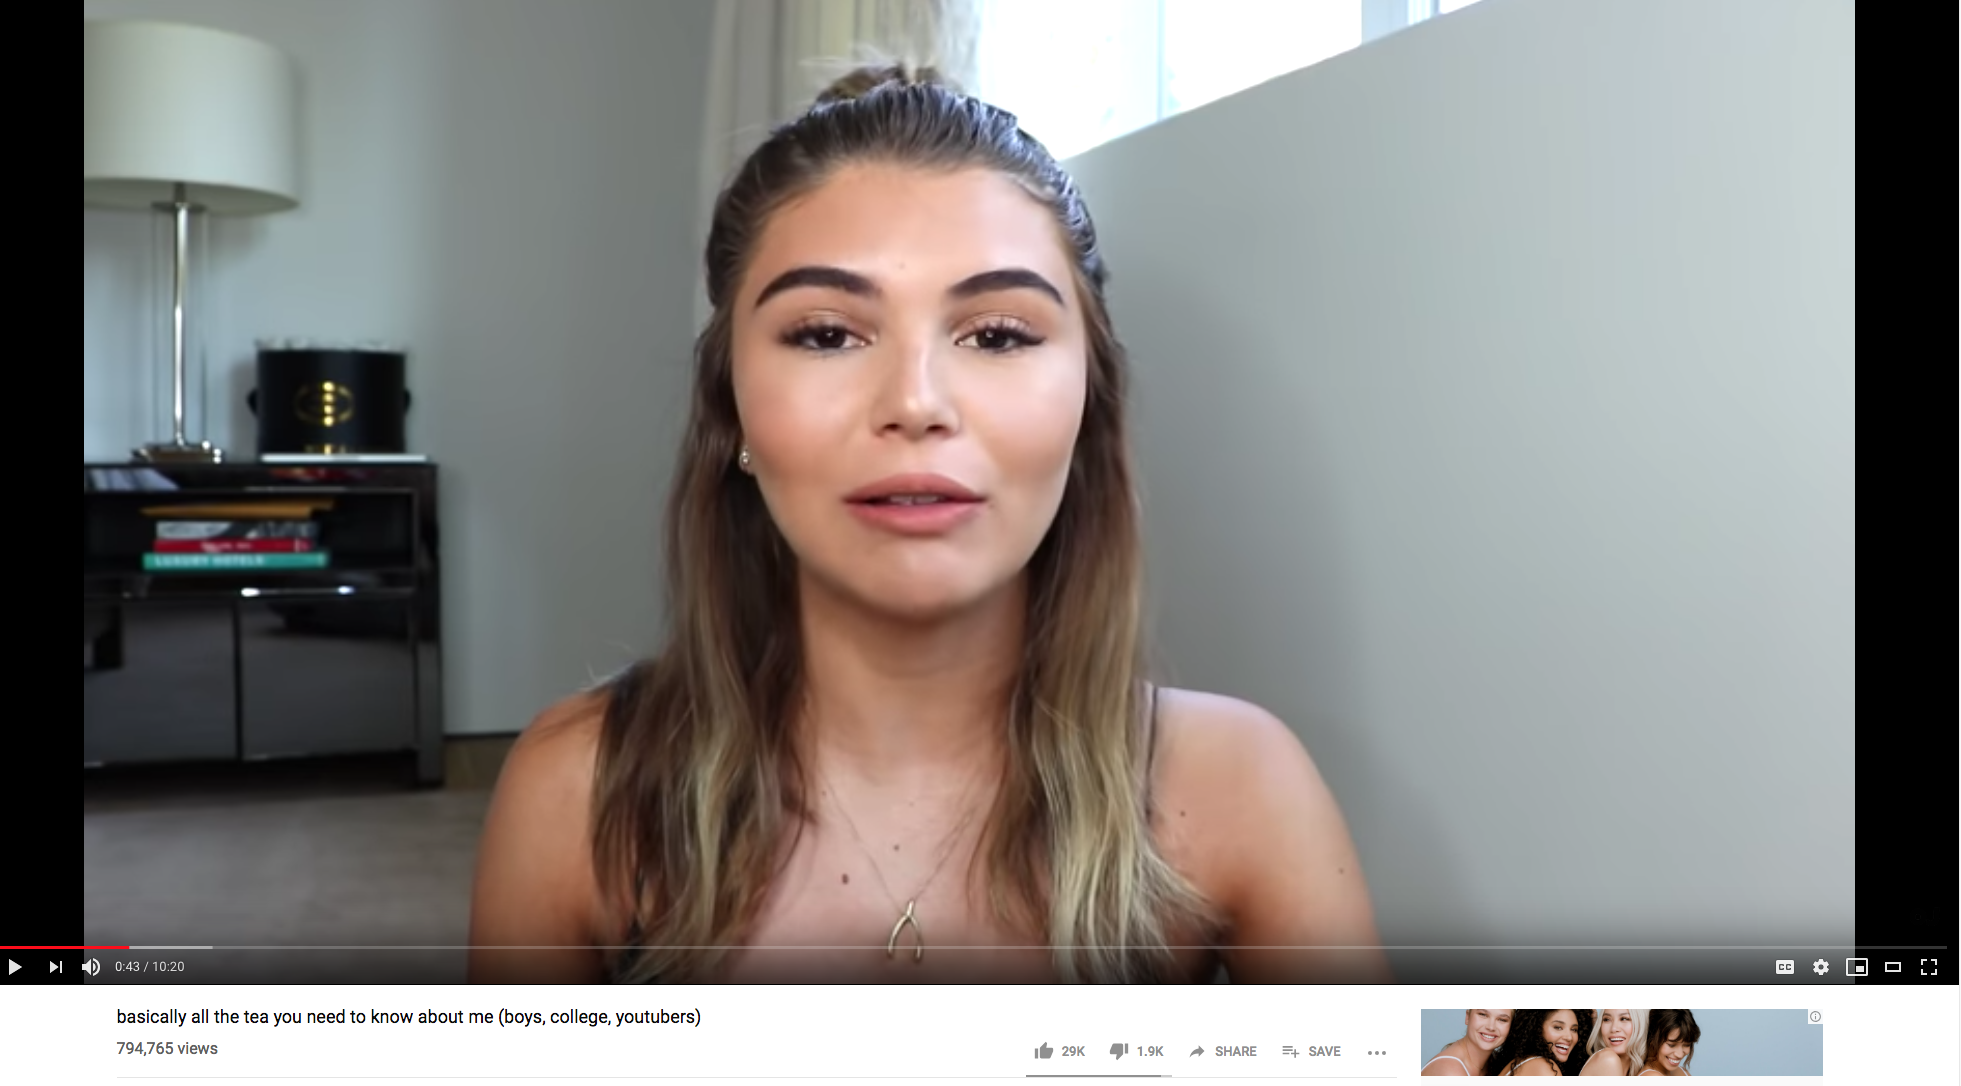 Olivia Jade's YouTube video addressing her plans for college at USC. "I don’t really care about school, as you guys all know," she said. (YouTube)